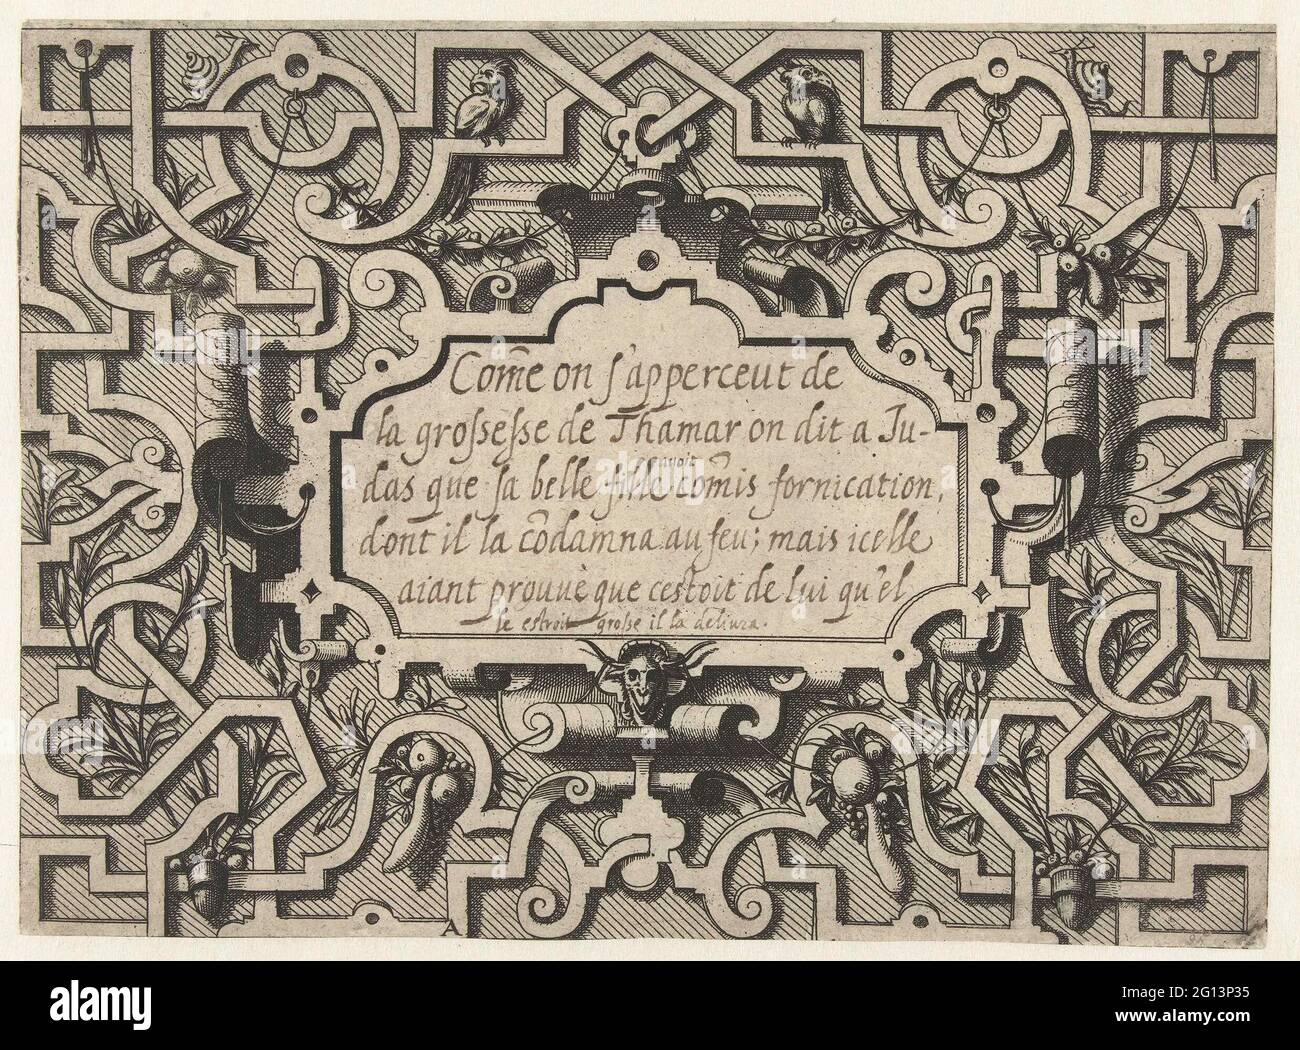 Cartouche surrounded by Moresken, two birds and two snails at the top; Cartouches in a picture frame of roller and fitting work with grotesken, moresken, garlands, mascarons and trophies. In the cartouche, a text written with pen (Come on s'Papperceut de / la grossesse de Thamar ...). Leaf A from series of 16 sheets, literate A-Q. Shaded or dotted background. Stock Photo